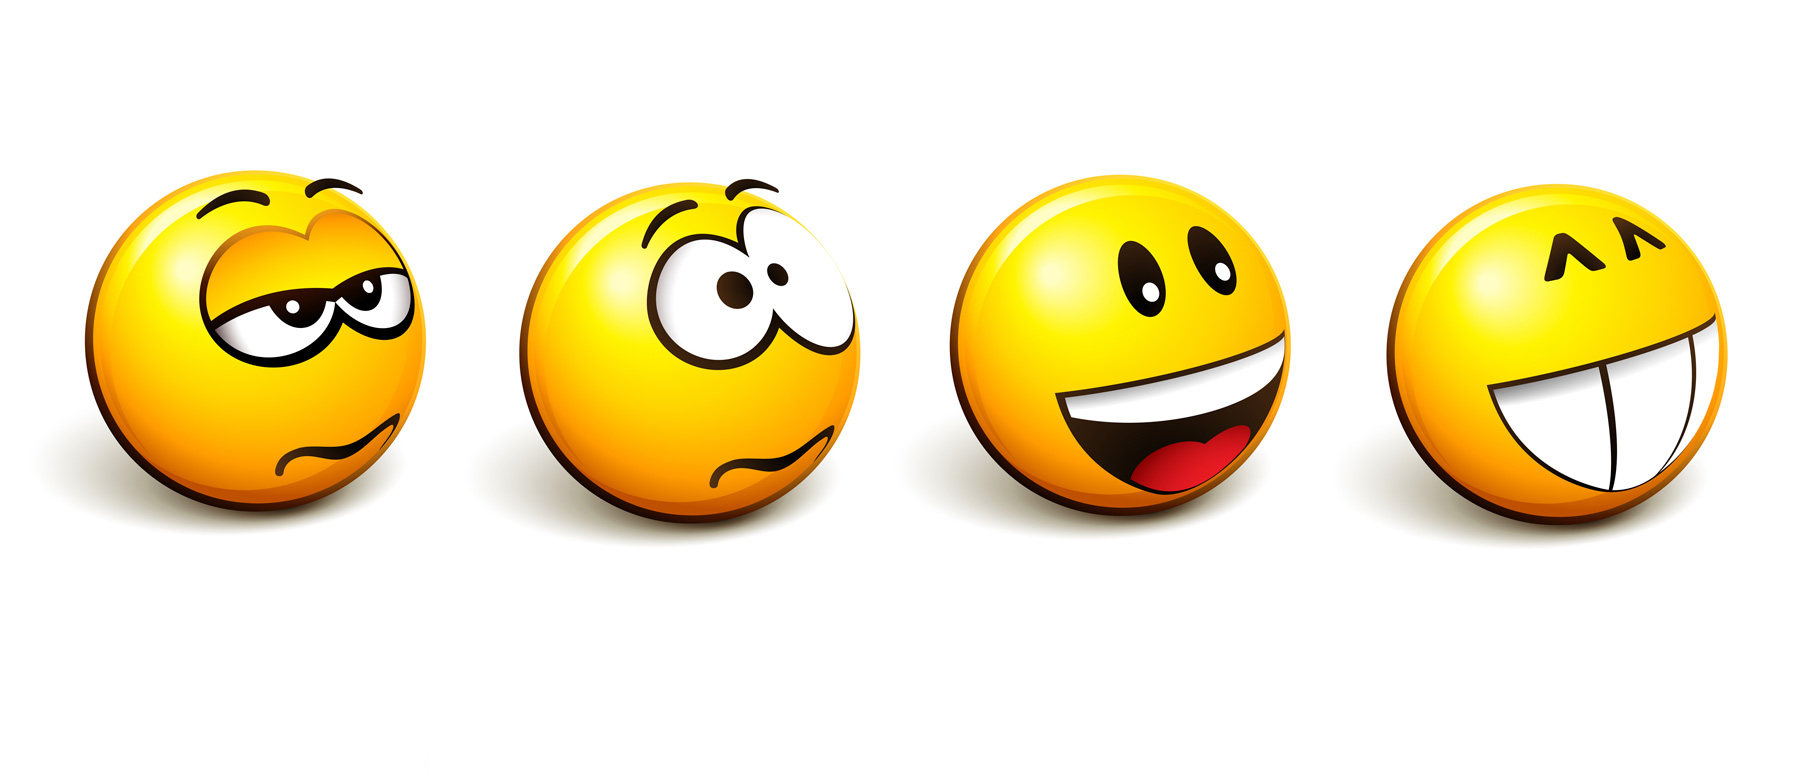 Emoticons Animated Gif | Free Download Clip Art | Free Clip Art ...